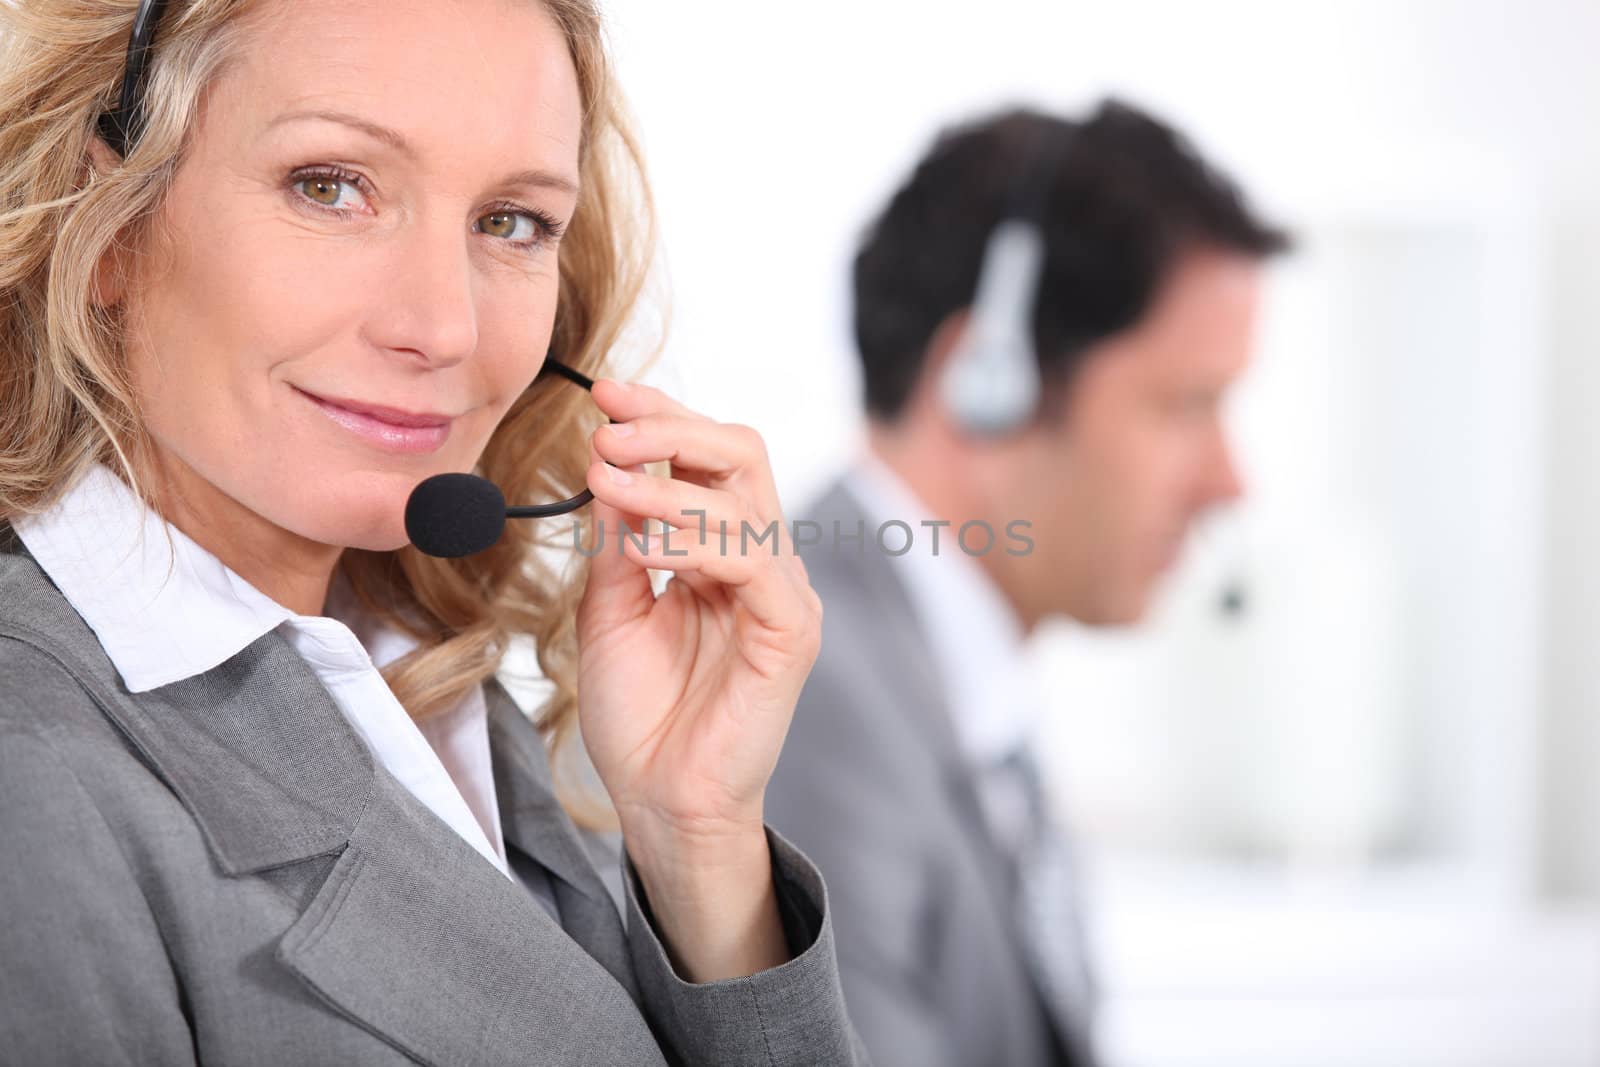 Woman in a suit using a headset with a male colleague in the background